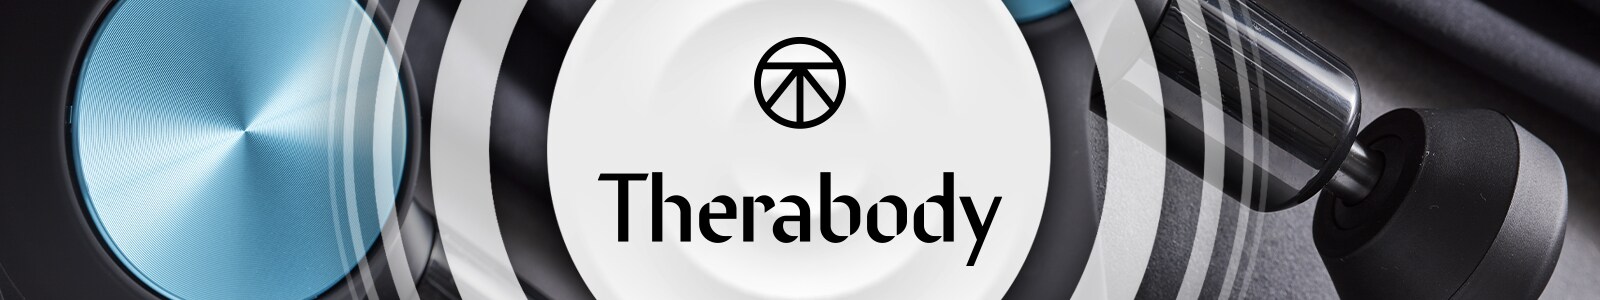 Image shows the Therabody logo.